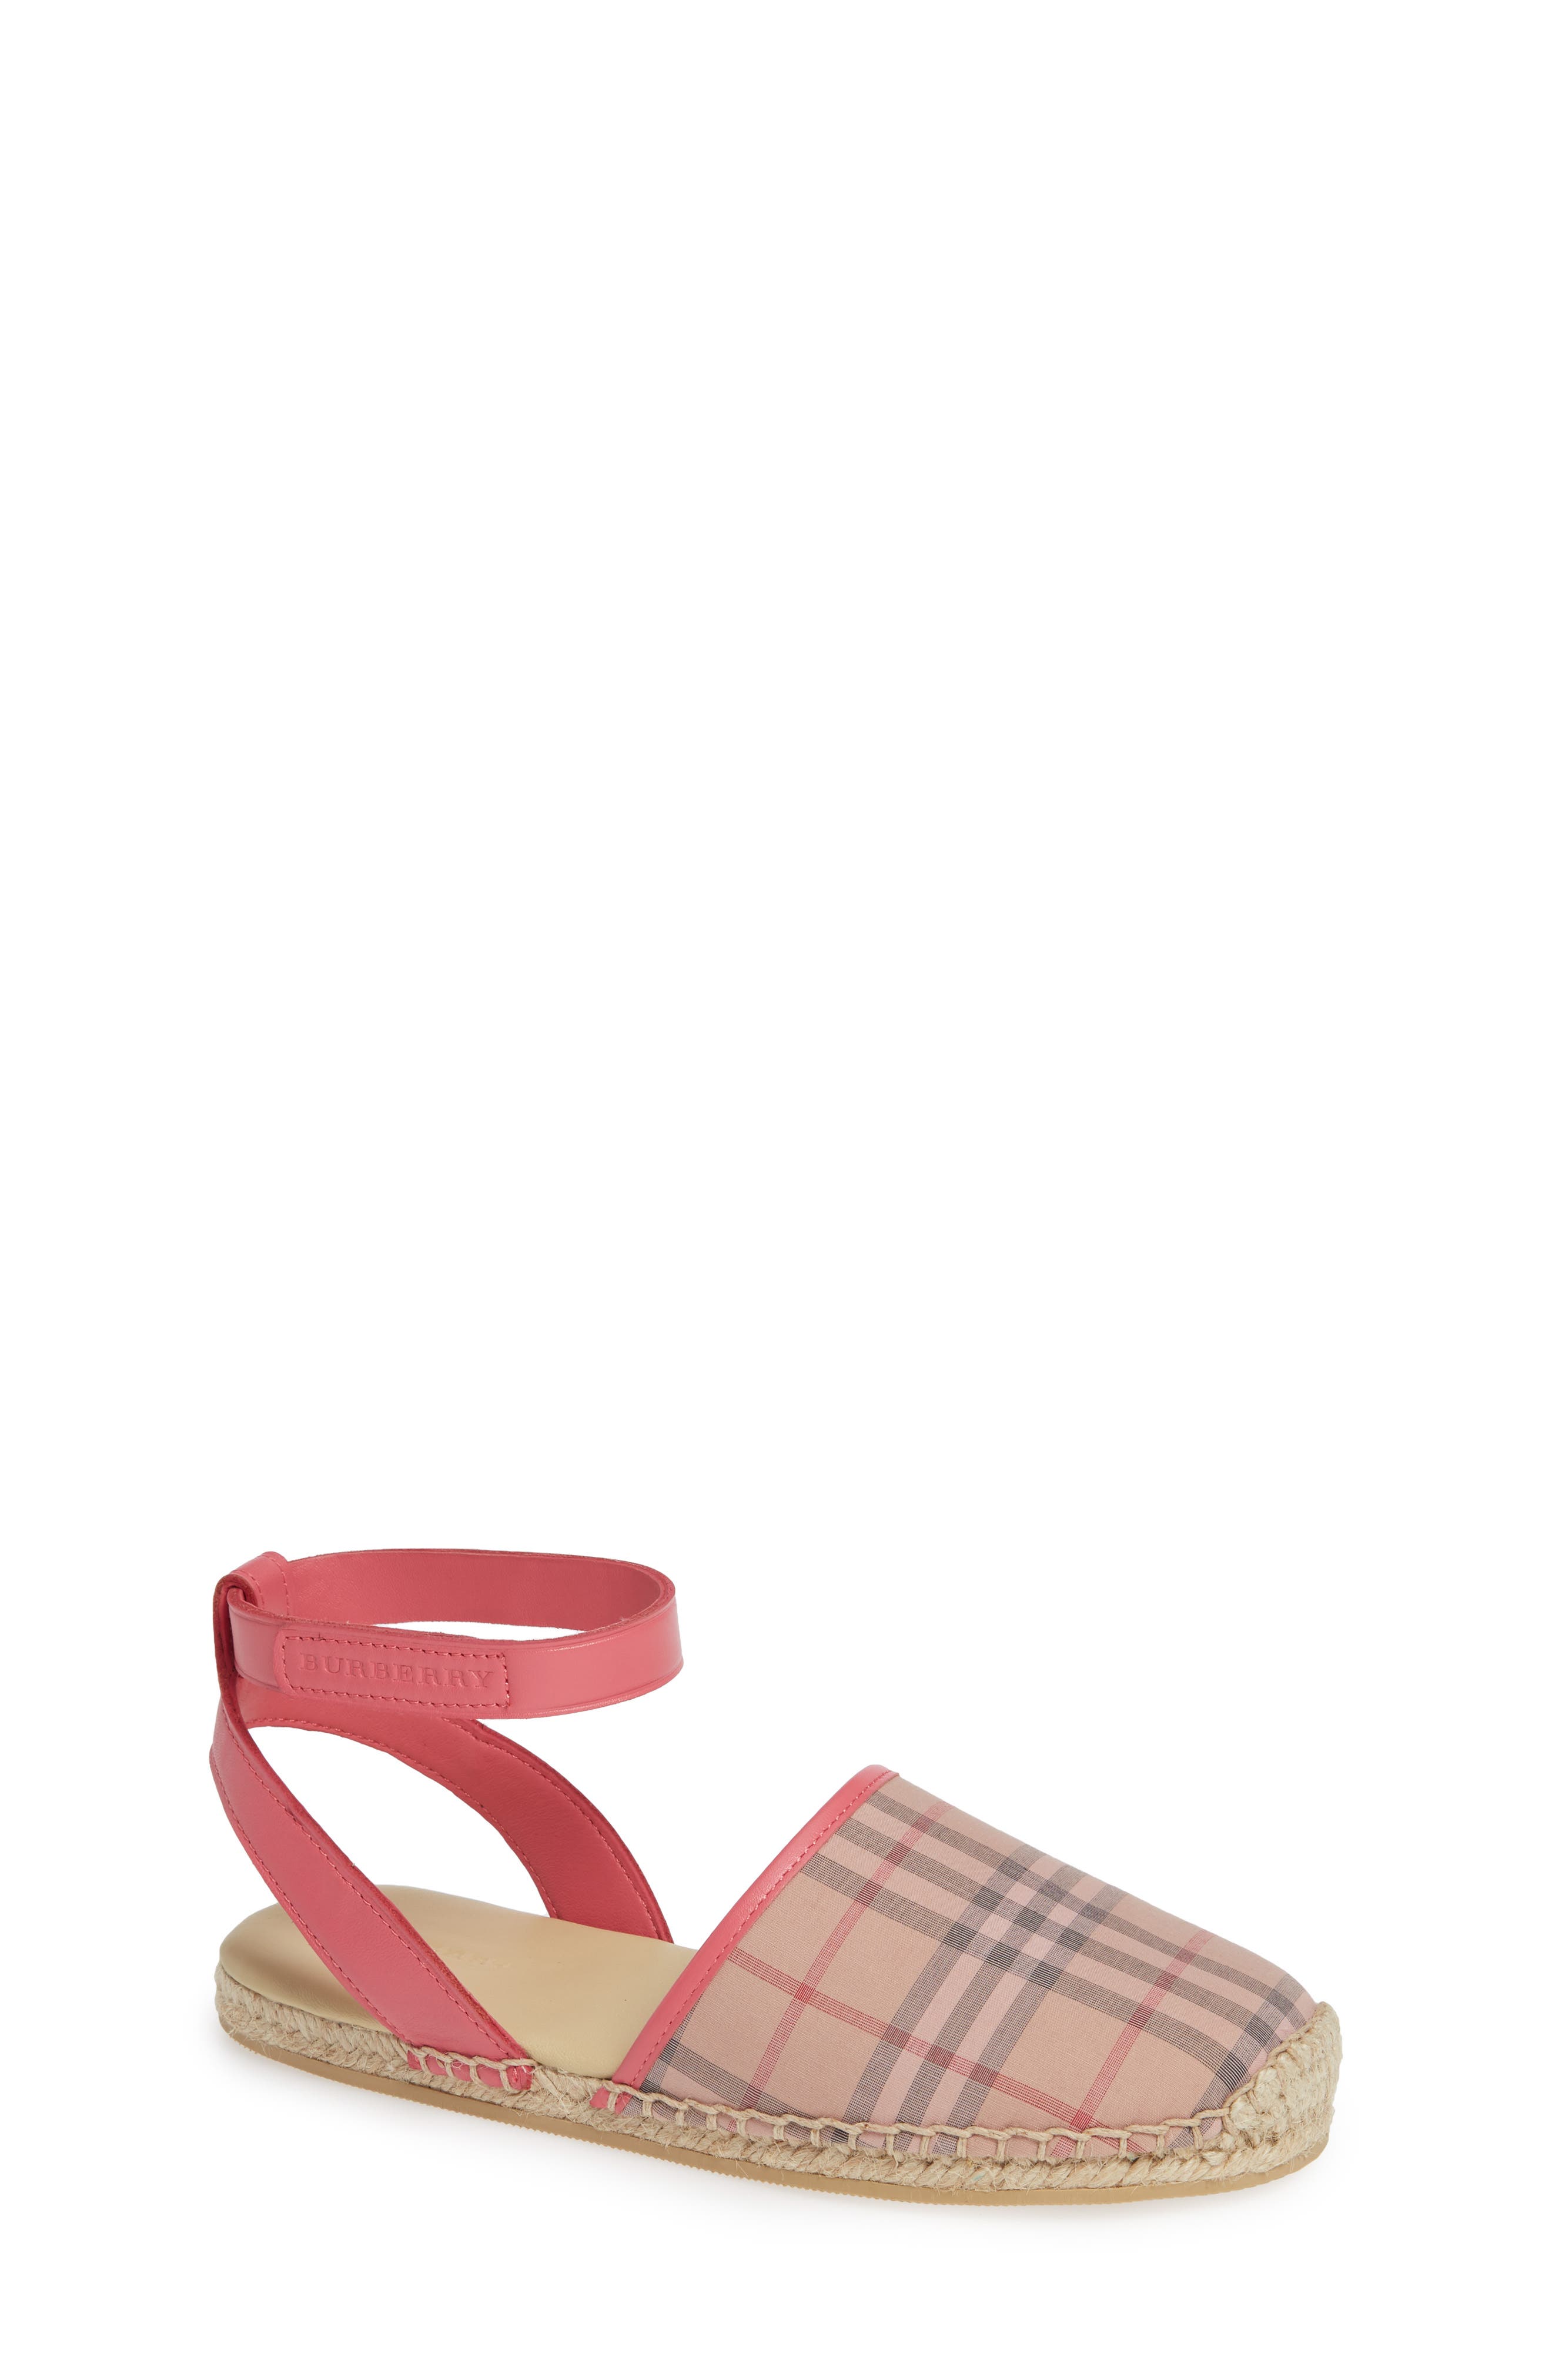 burberry toddler sandals